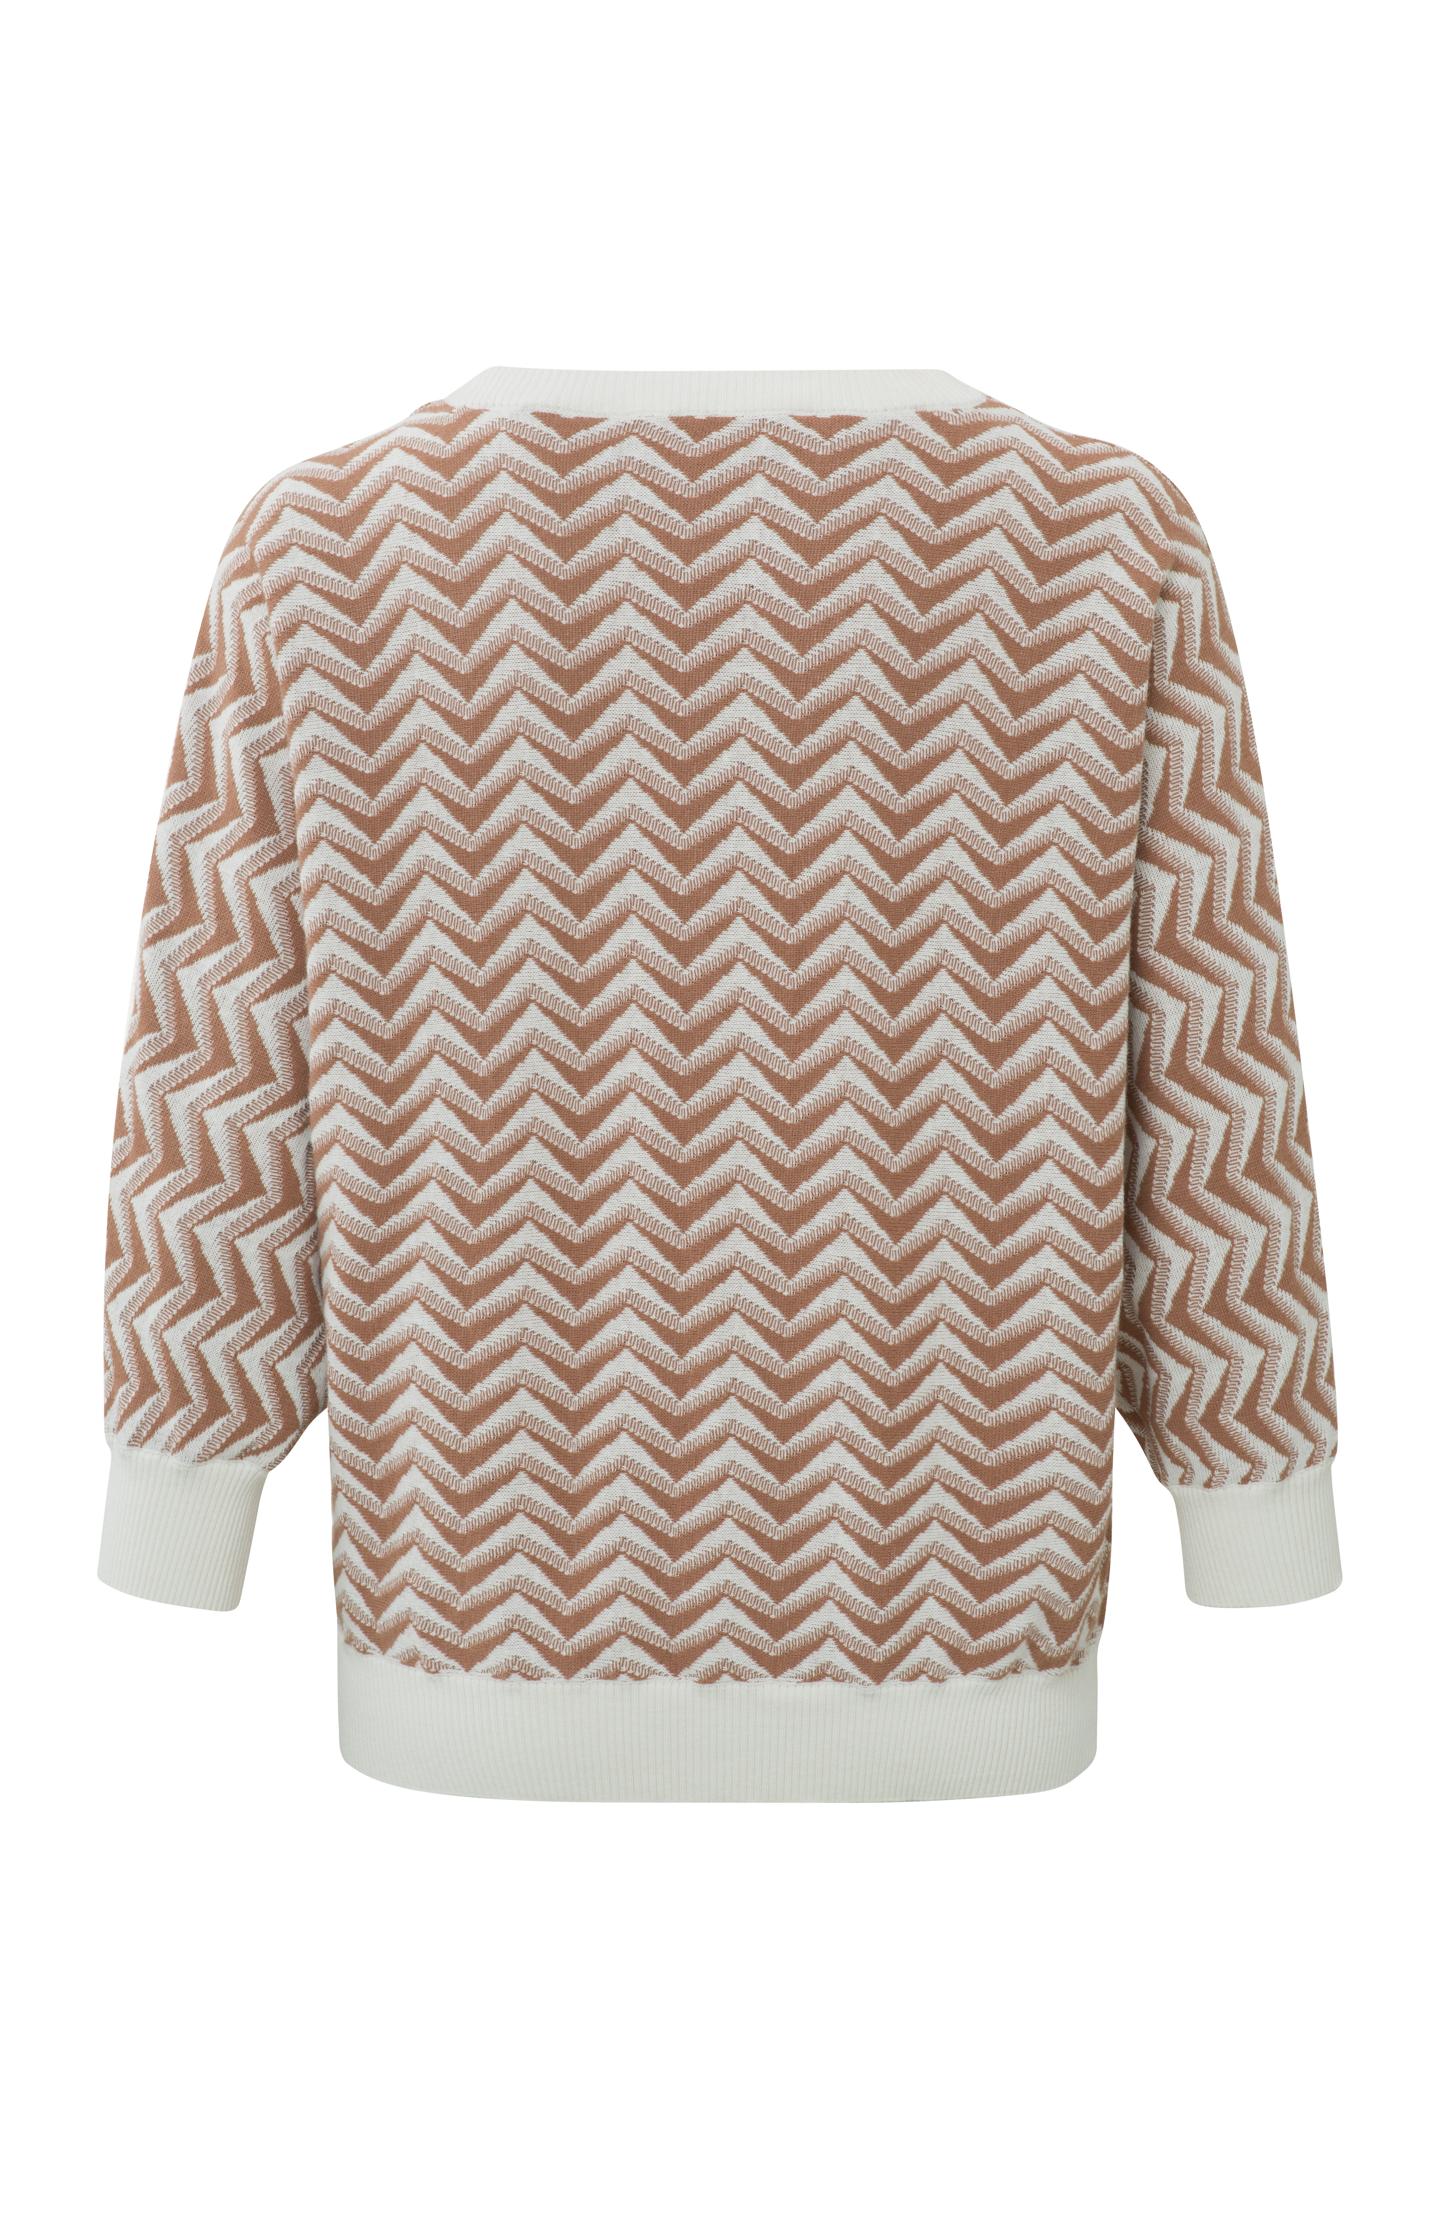 Jacquard knitted sweater with round neck and 3/4 sleeves